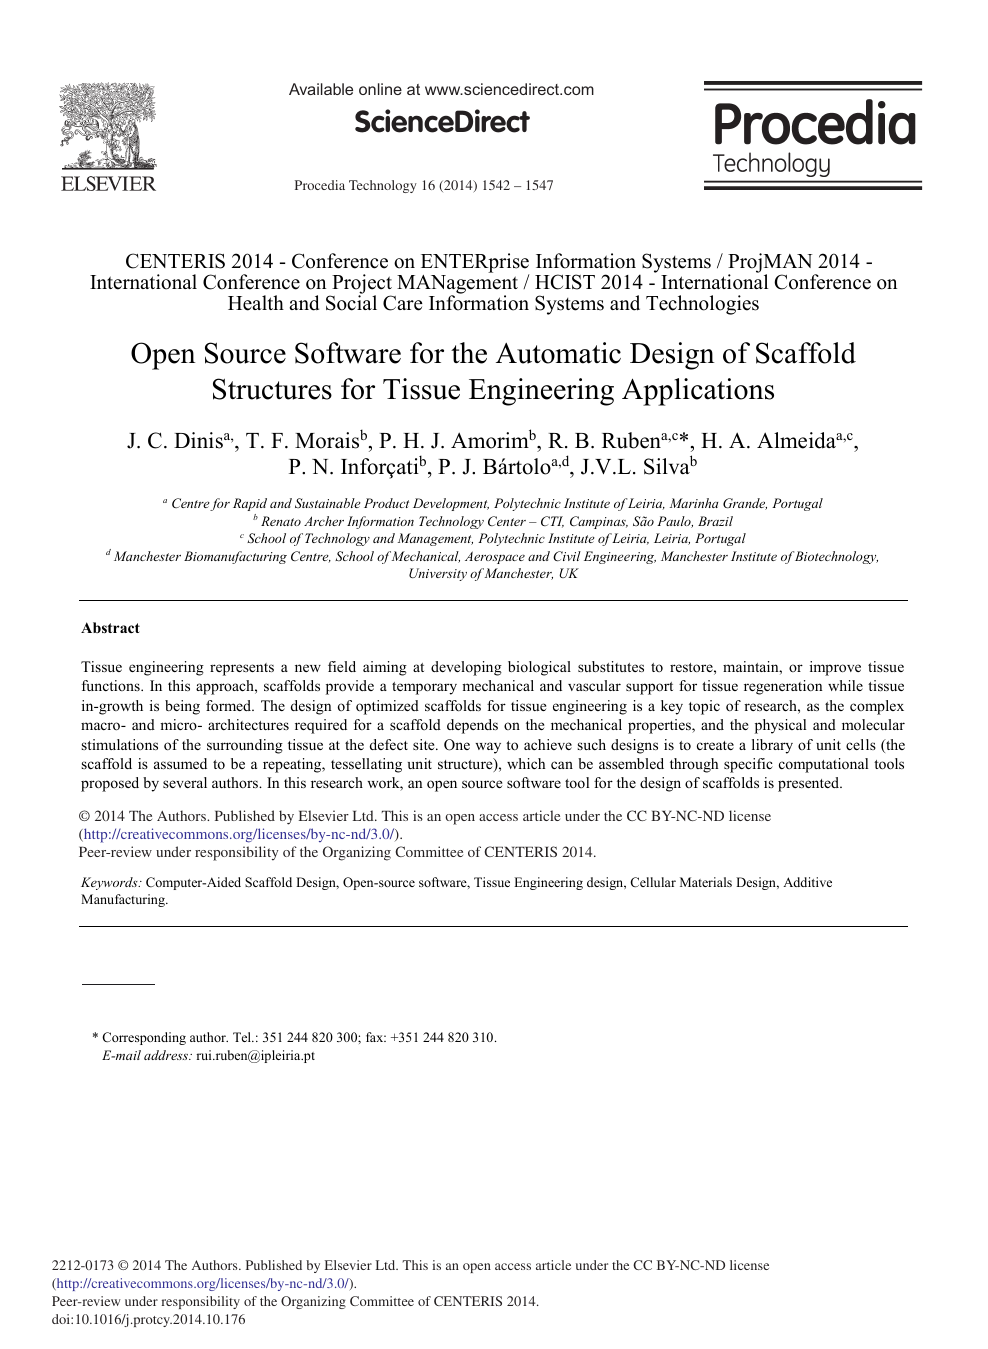 Open Source Software For The Automatic Design Of Scaffold Structures For Tissue Engineering Applications Topic Of Research Paper In Materials Engineering Download Scholarly Article Pdf And Read For Free On Cyberleninka